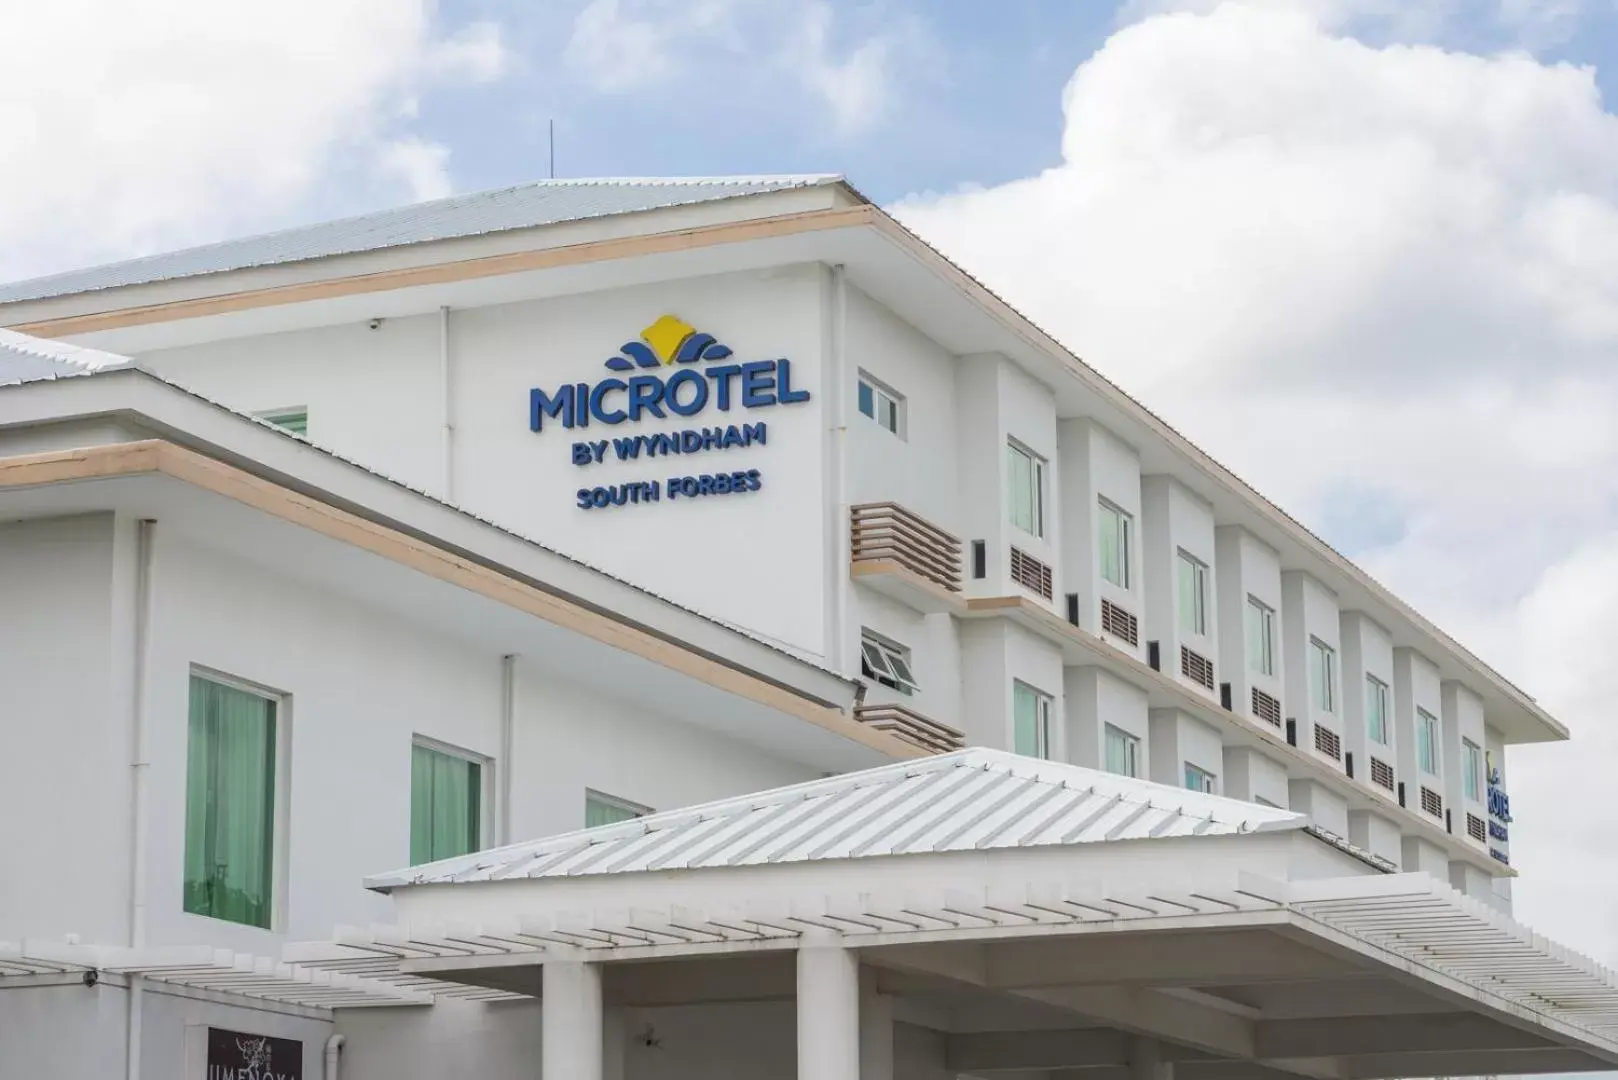 Property building in Microtel by Wyndham South Forbes